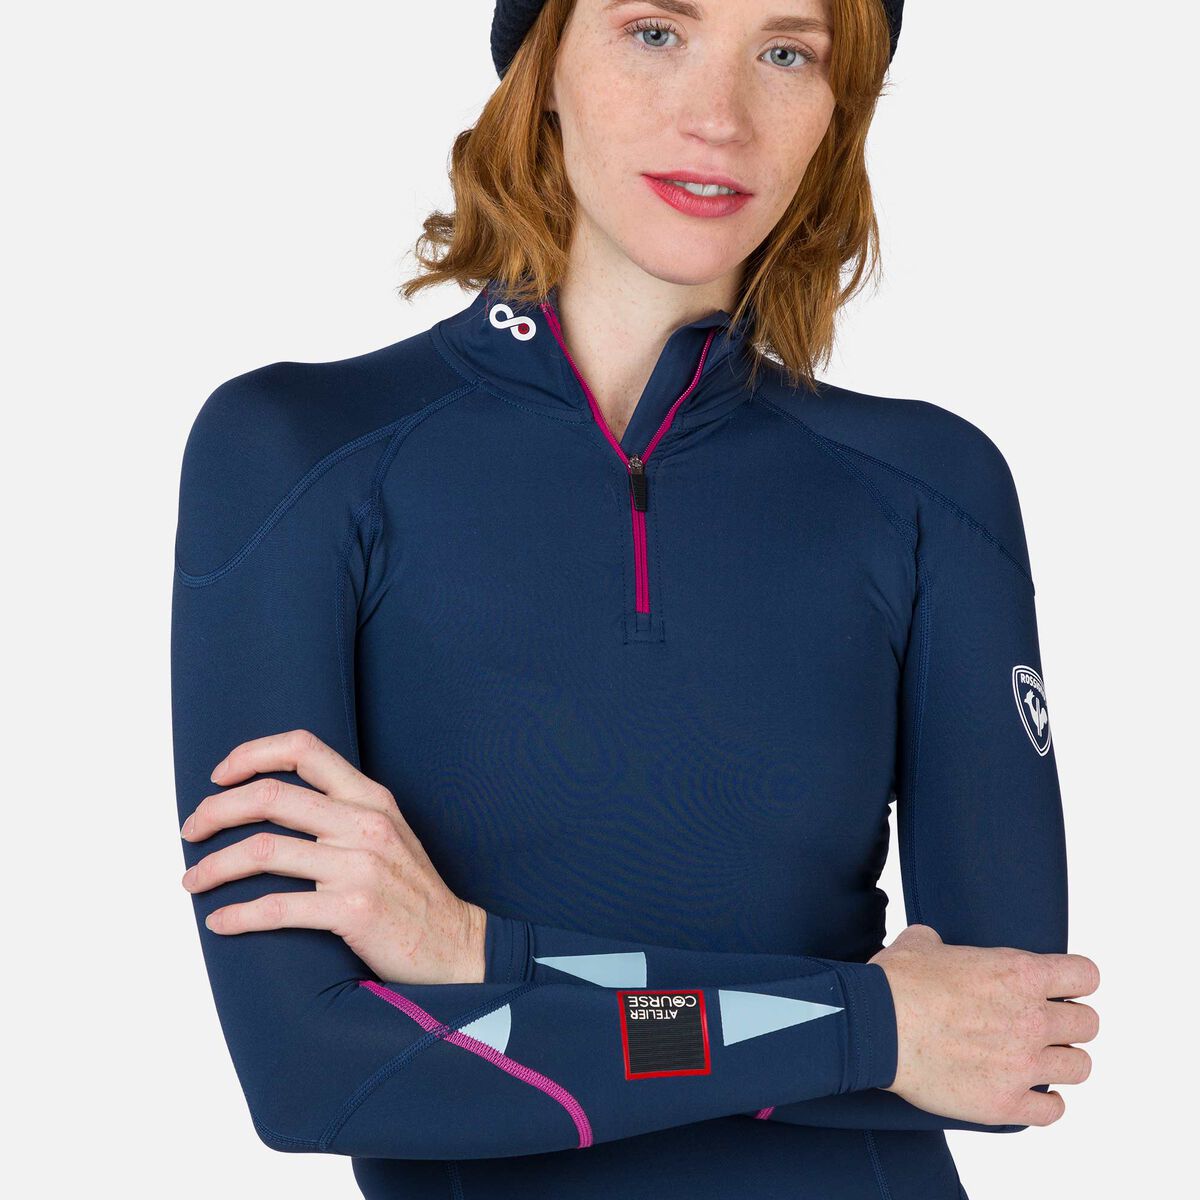 Thermal wear ROSSIGNOL W Infini Compression Race Top Navy - 2022/23, Ski  Clothing \ Thermal Wear \ Womens